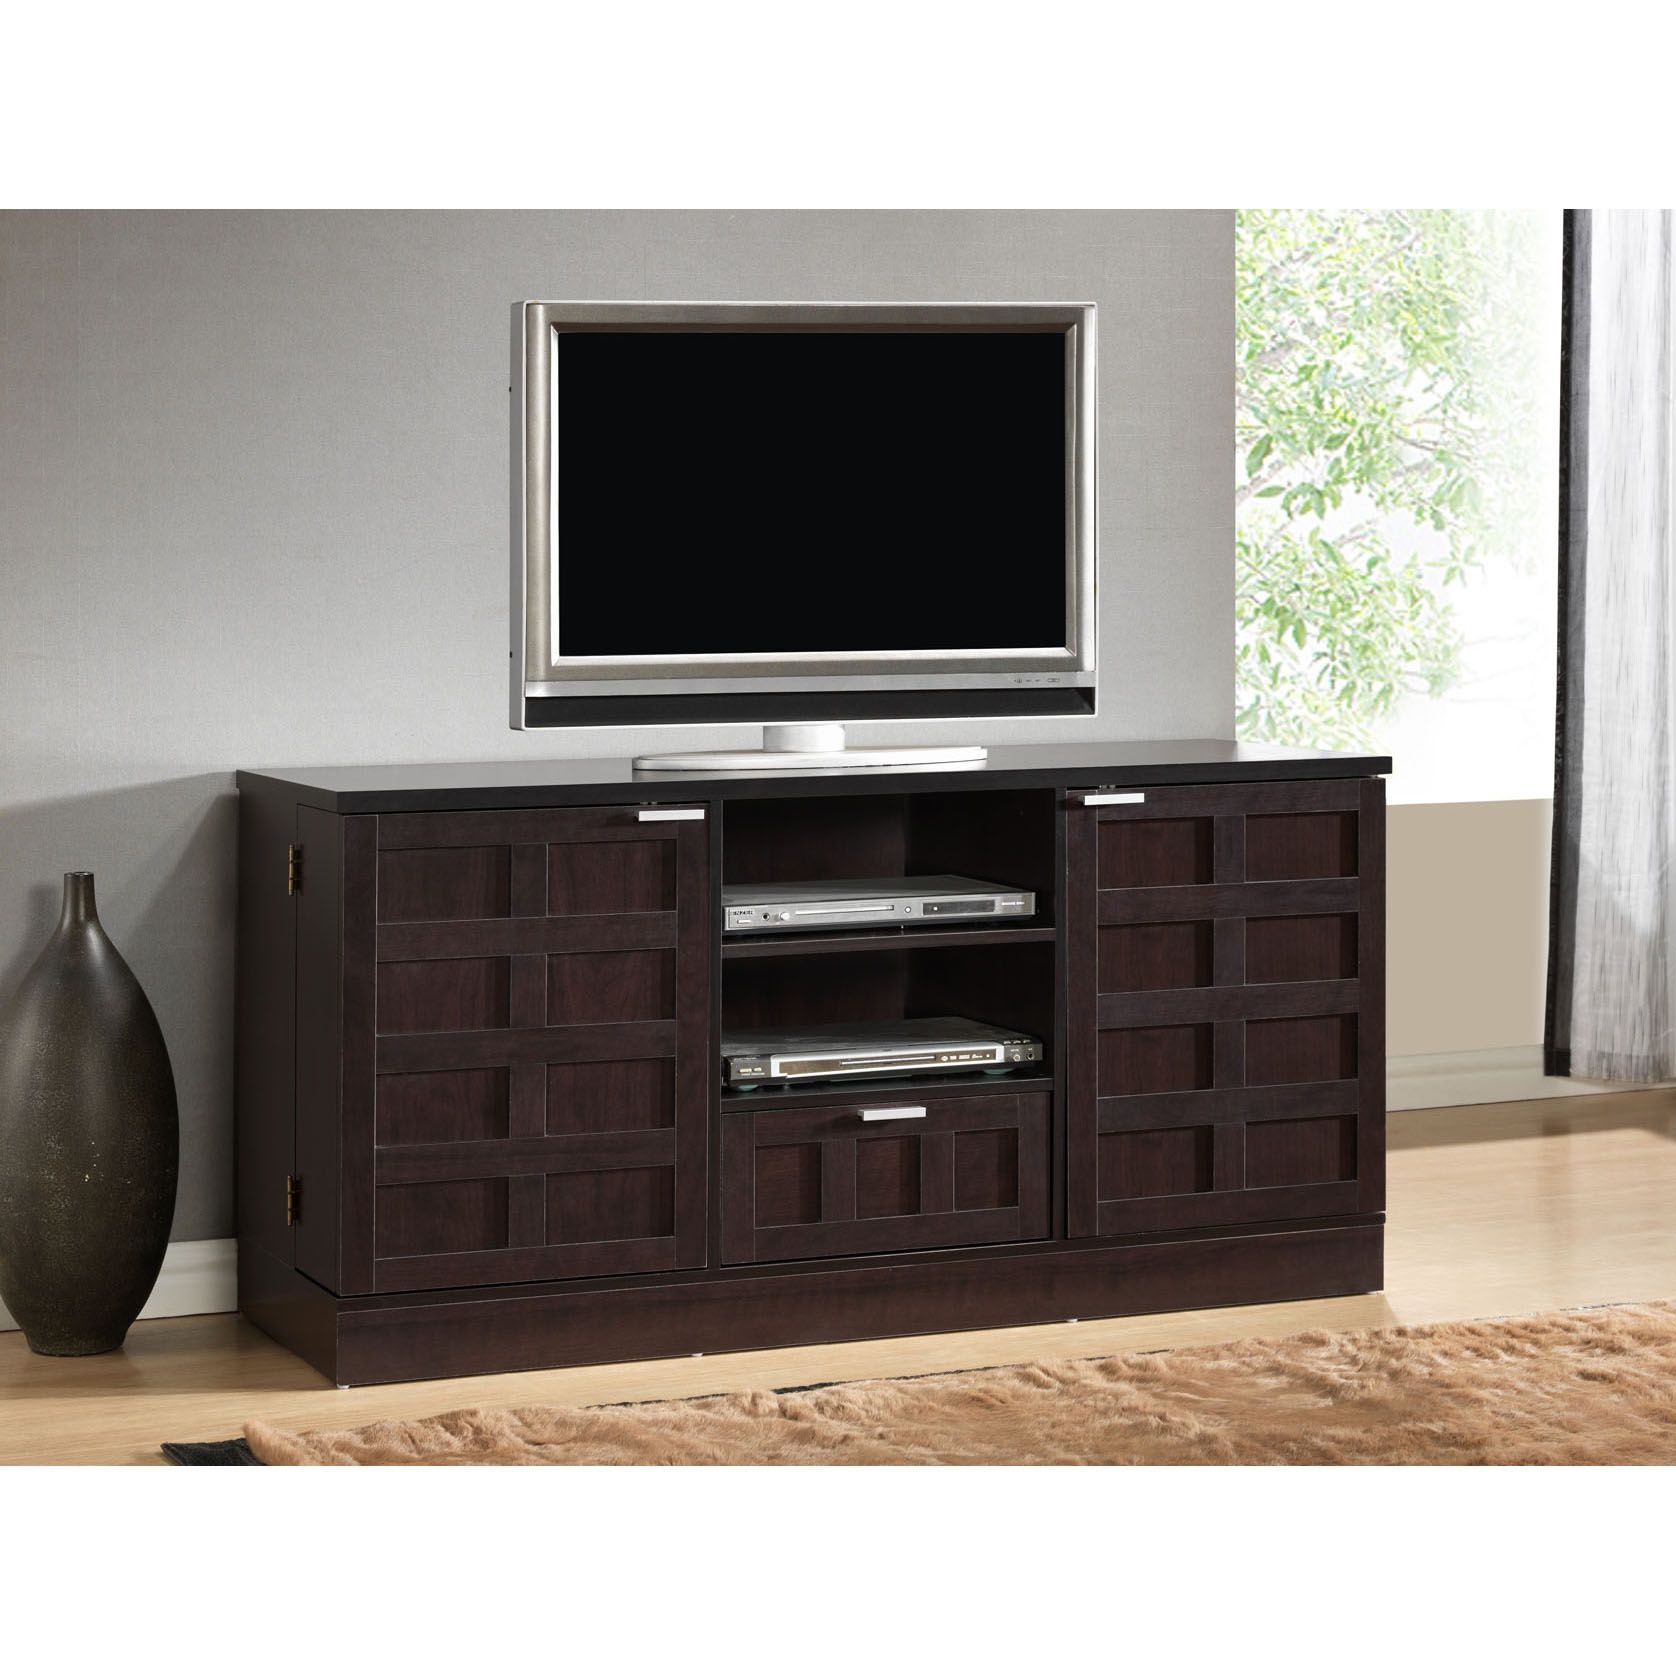 Long Media Cabinet For Your Living Room – Homesfeed Intended For Long Tv Stands Furniture (Photo 5 of 15)